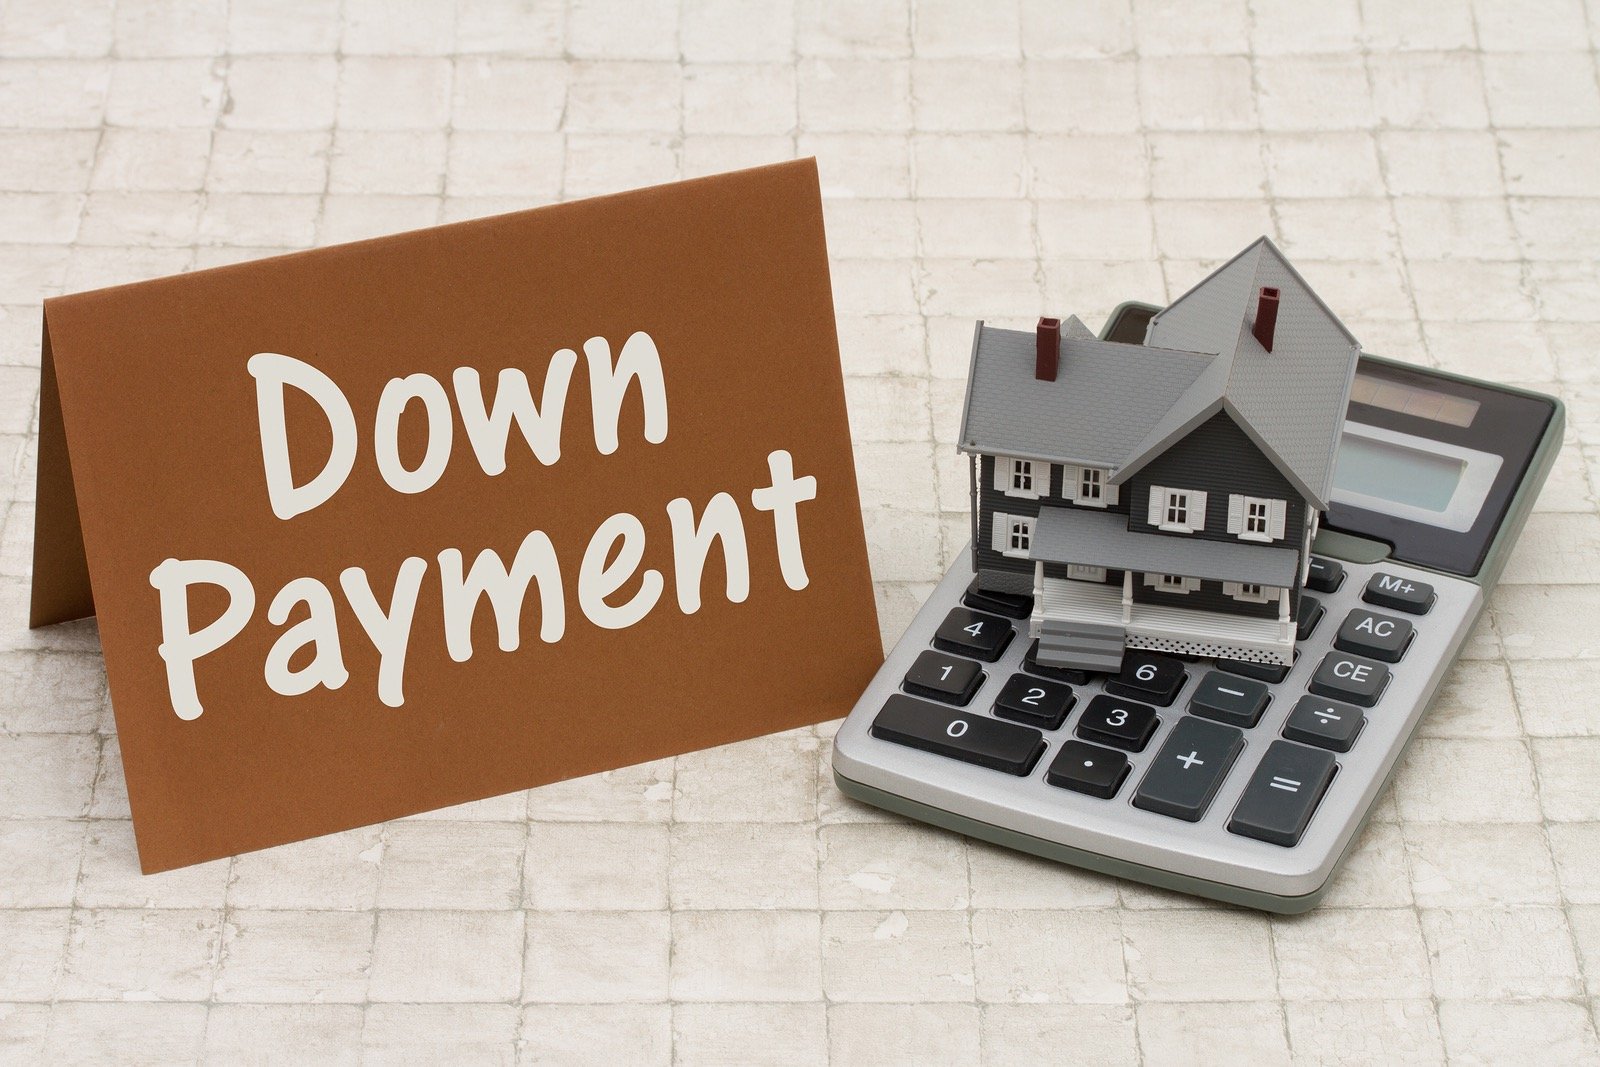 A Home Buyerâs Guide to Saving for a Down Payment